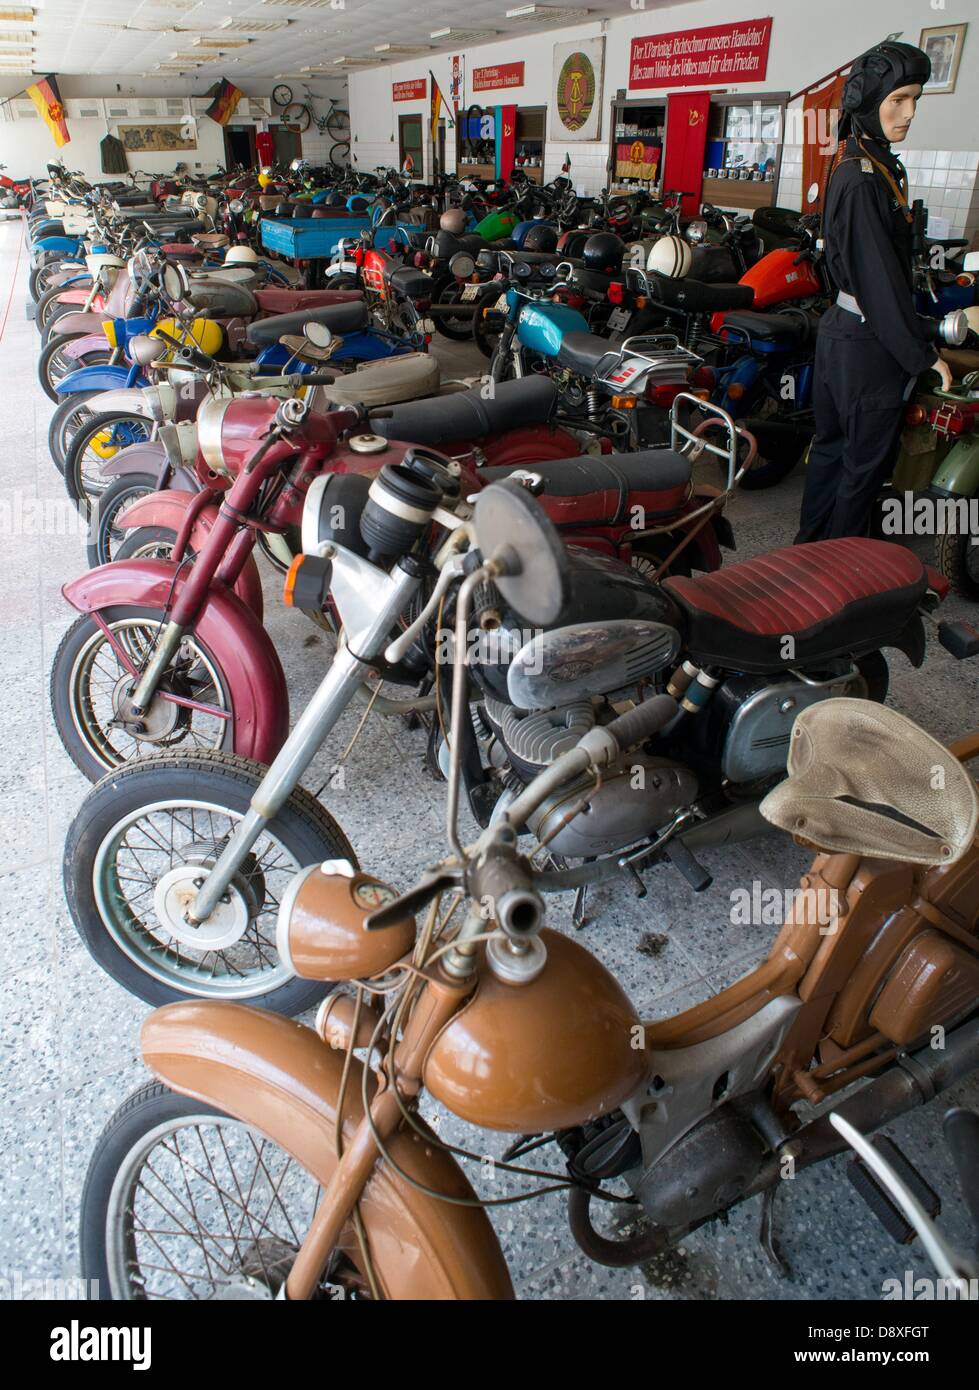 A room full of motorcycles from the Eastern bloc is pictured in the historical vehicle park of the Brunner family in Harnekop, Germany, 19 May 2013. Photo: PATRICK PLEUL Stock Photo